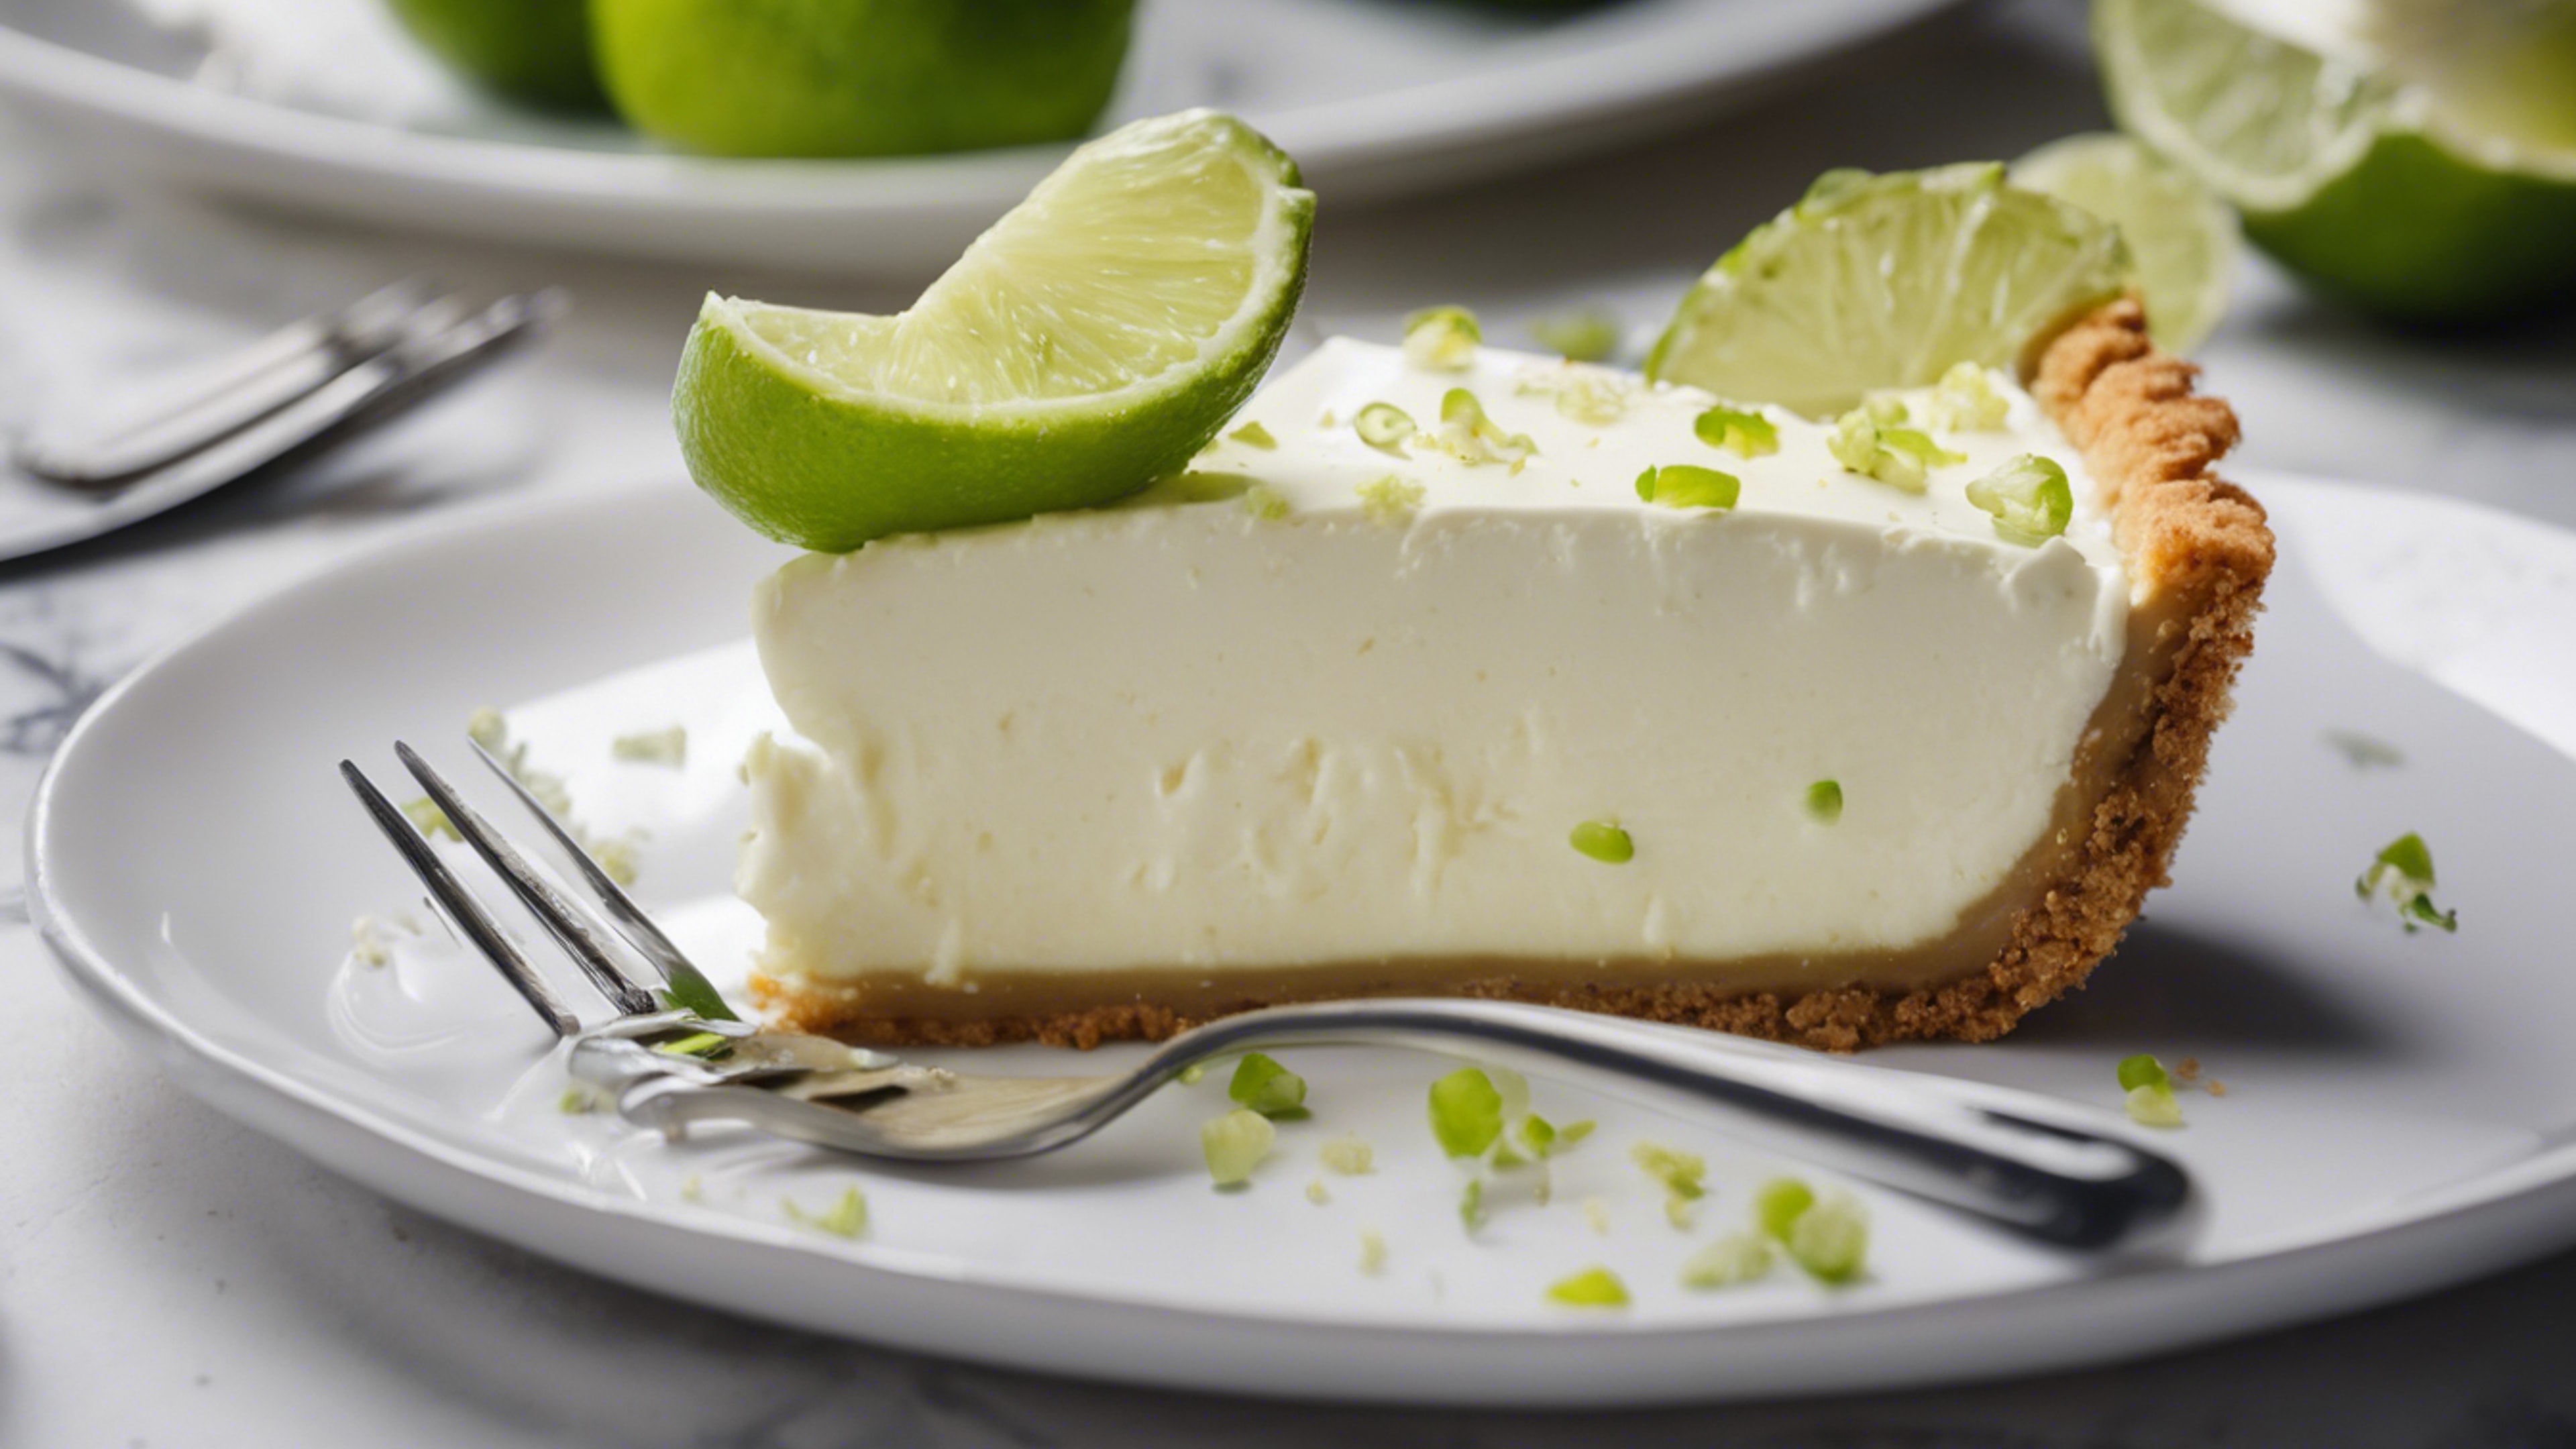 Delicious key lime pie served on a white ceramic plate with a silver fork. Wallpaper[dc9d1e1923f243919b66]